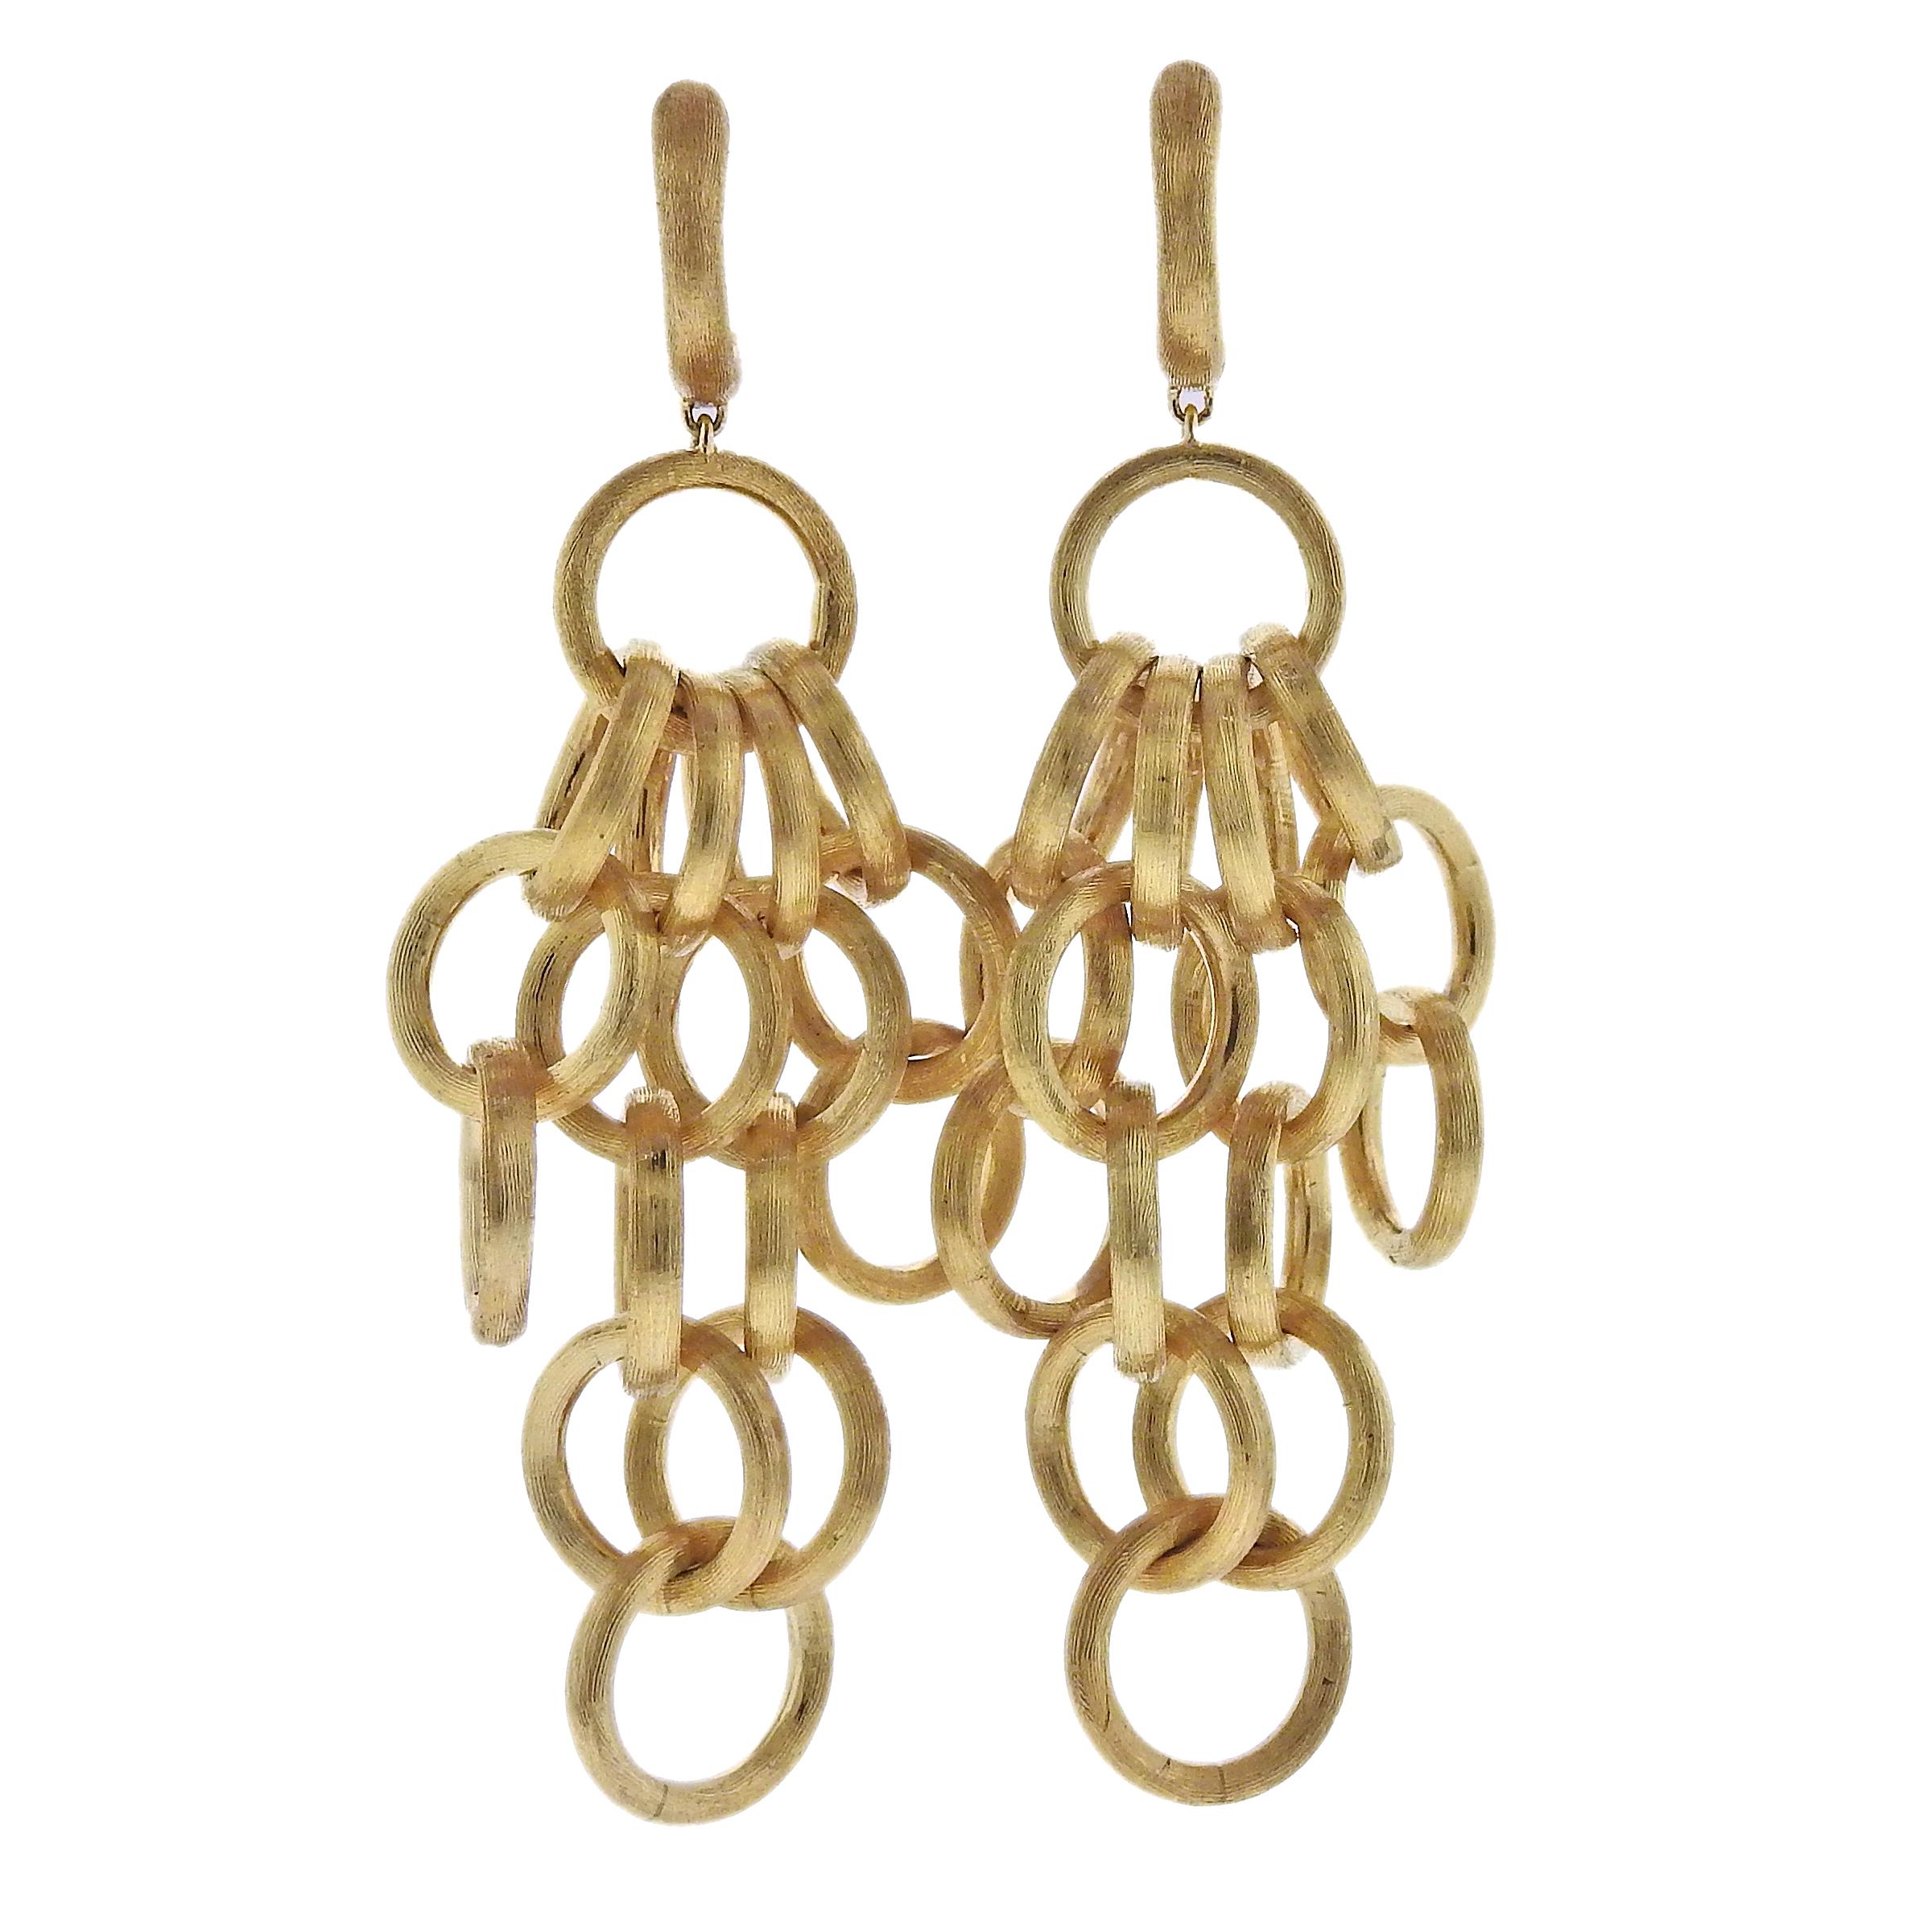 Marco Bicego Jaipur collection 18K yellow gold multi circle link dangle drop earrings.  Earrings are 2 1/2